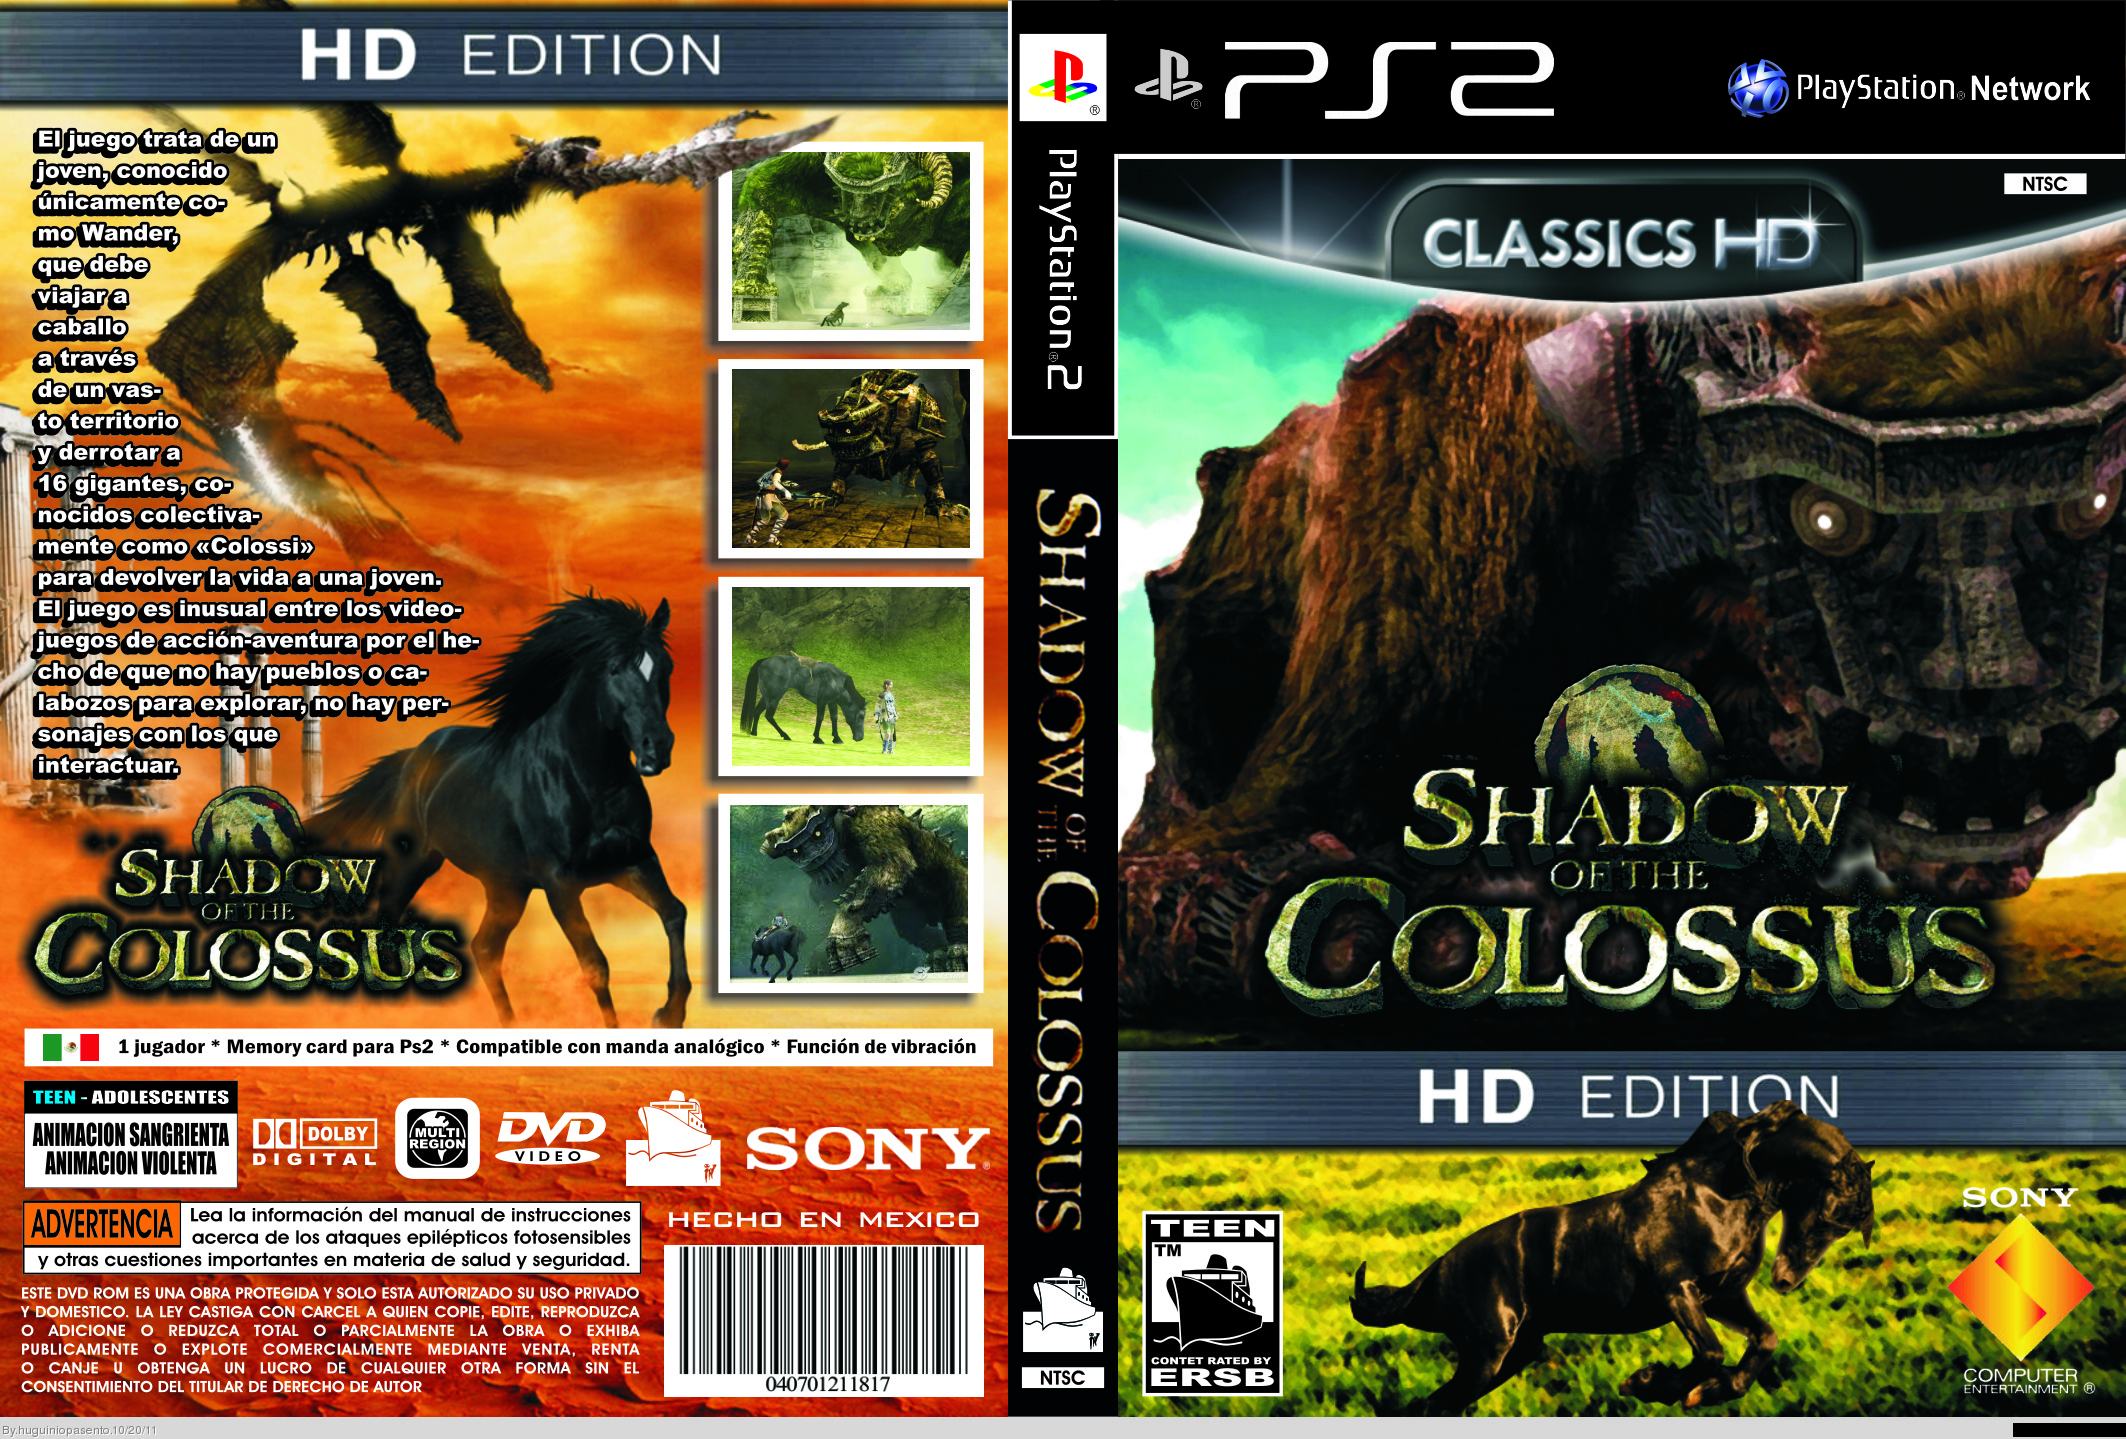 Shadow of the Colossus box cover